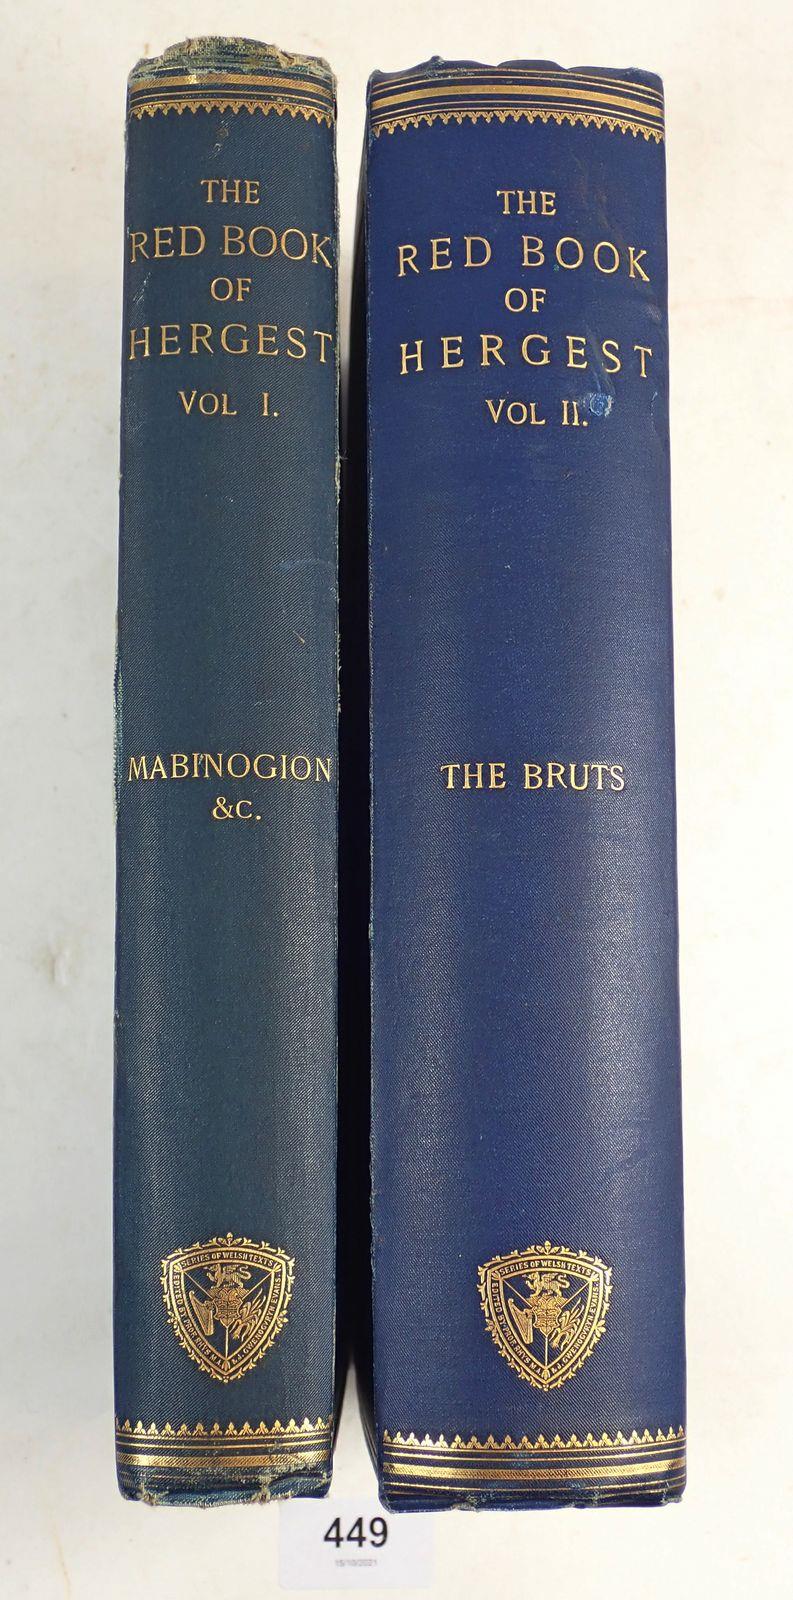 The Red Book of Hergest, Vol 1, 1887, Mabinogion & C and The Red Book of Hergest Vol II, 1890, The